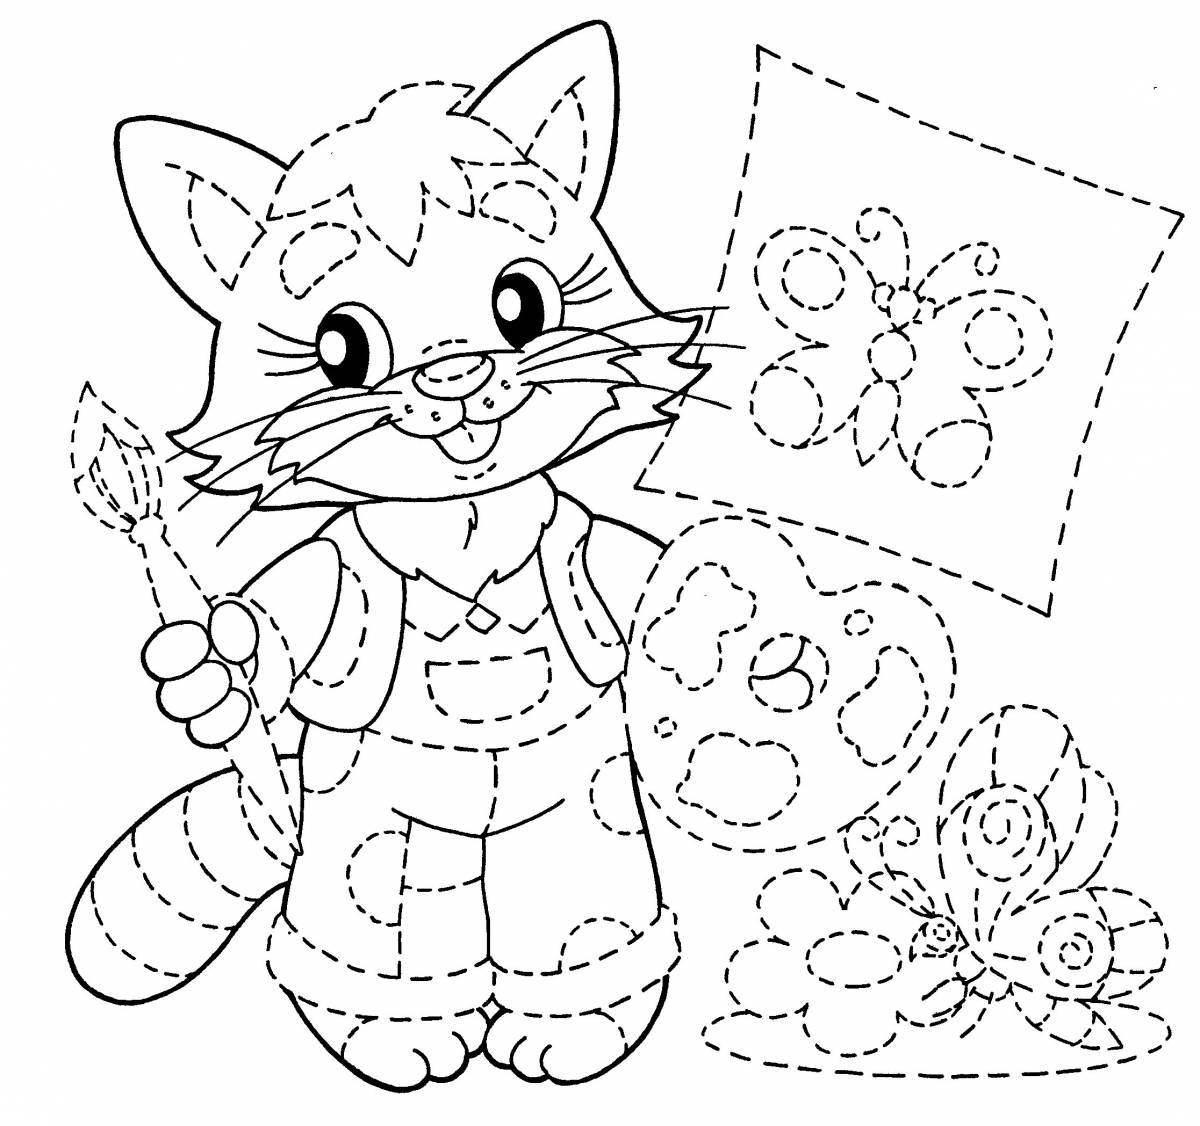 Coloured sparkling coloring book for children 6 7